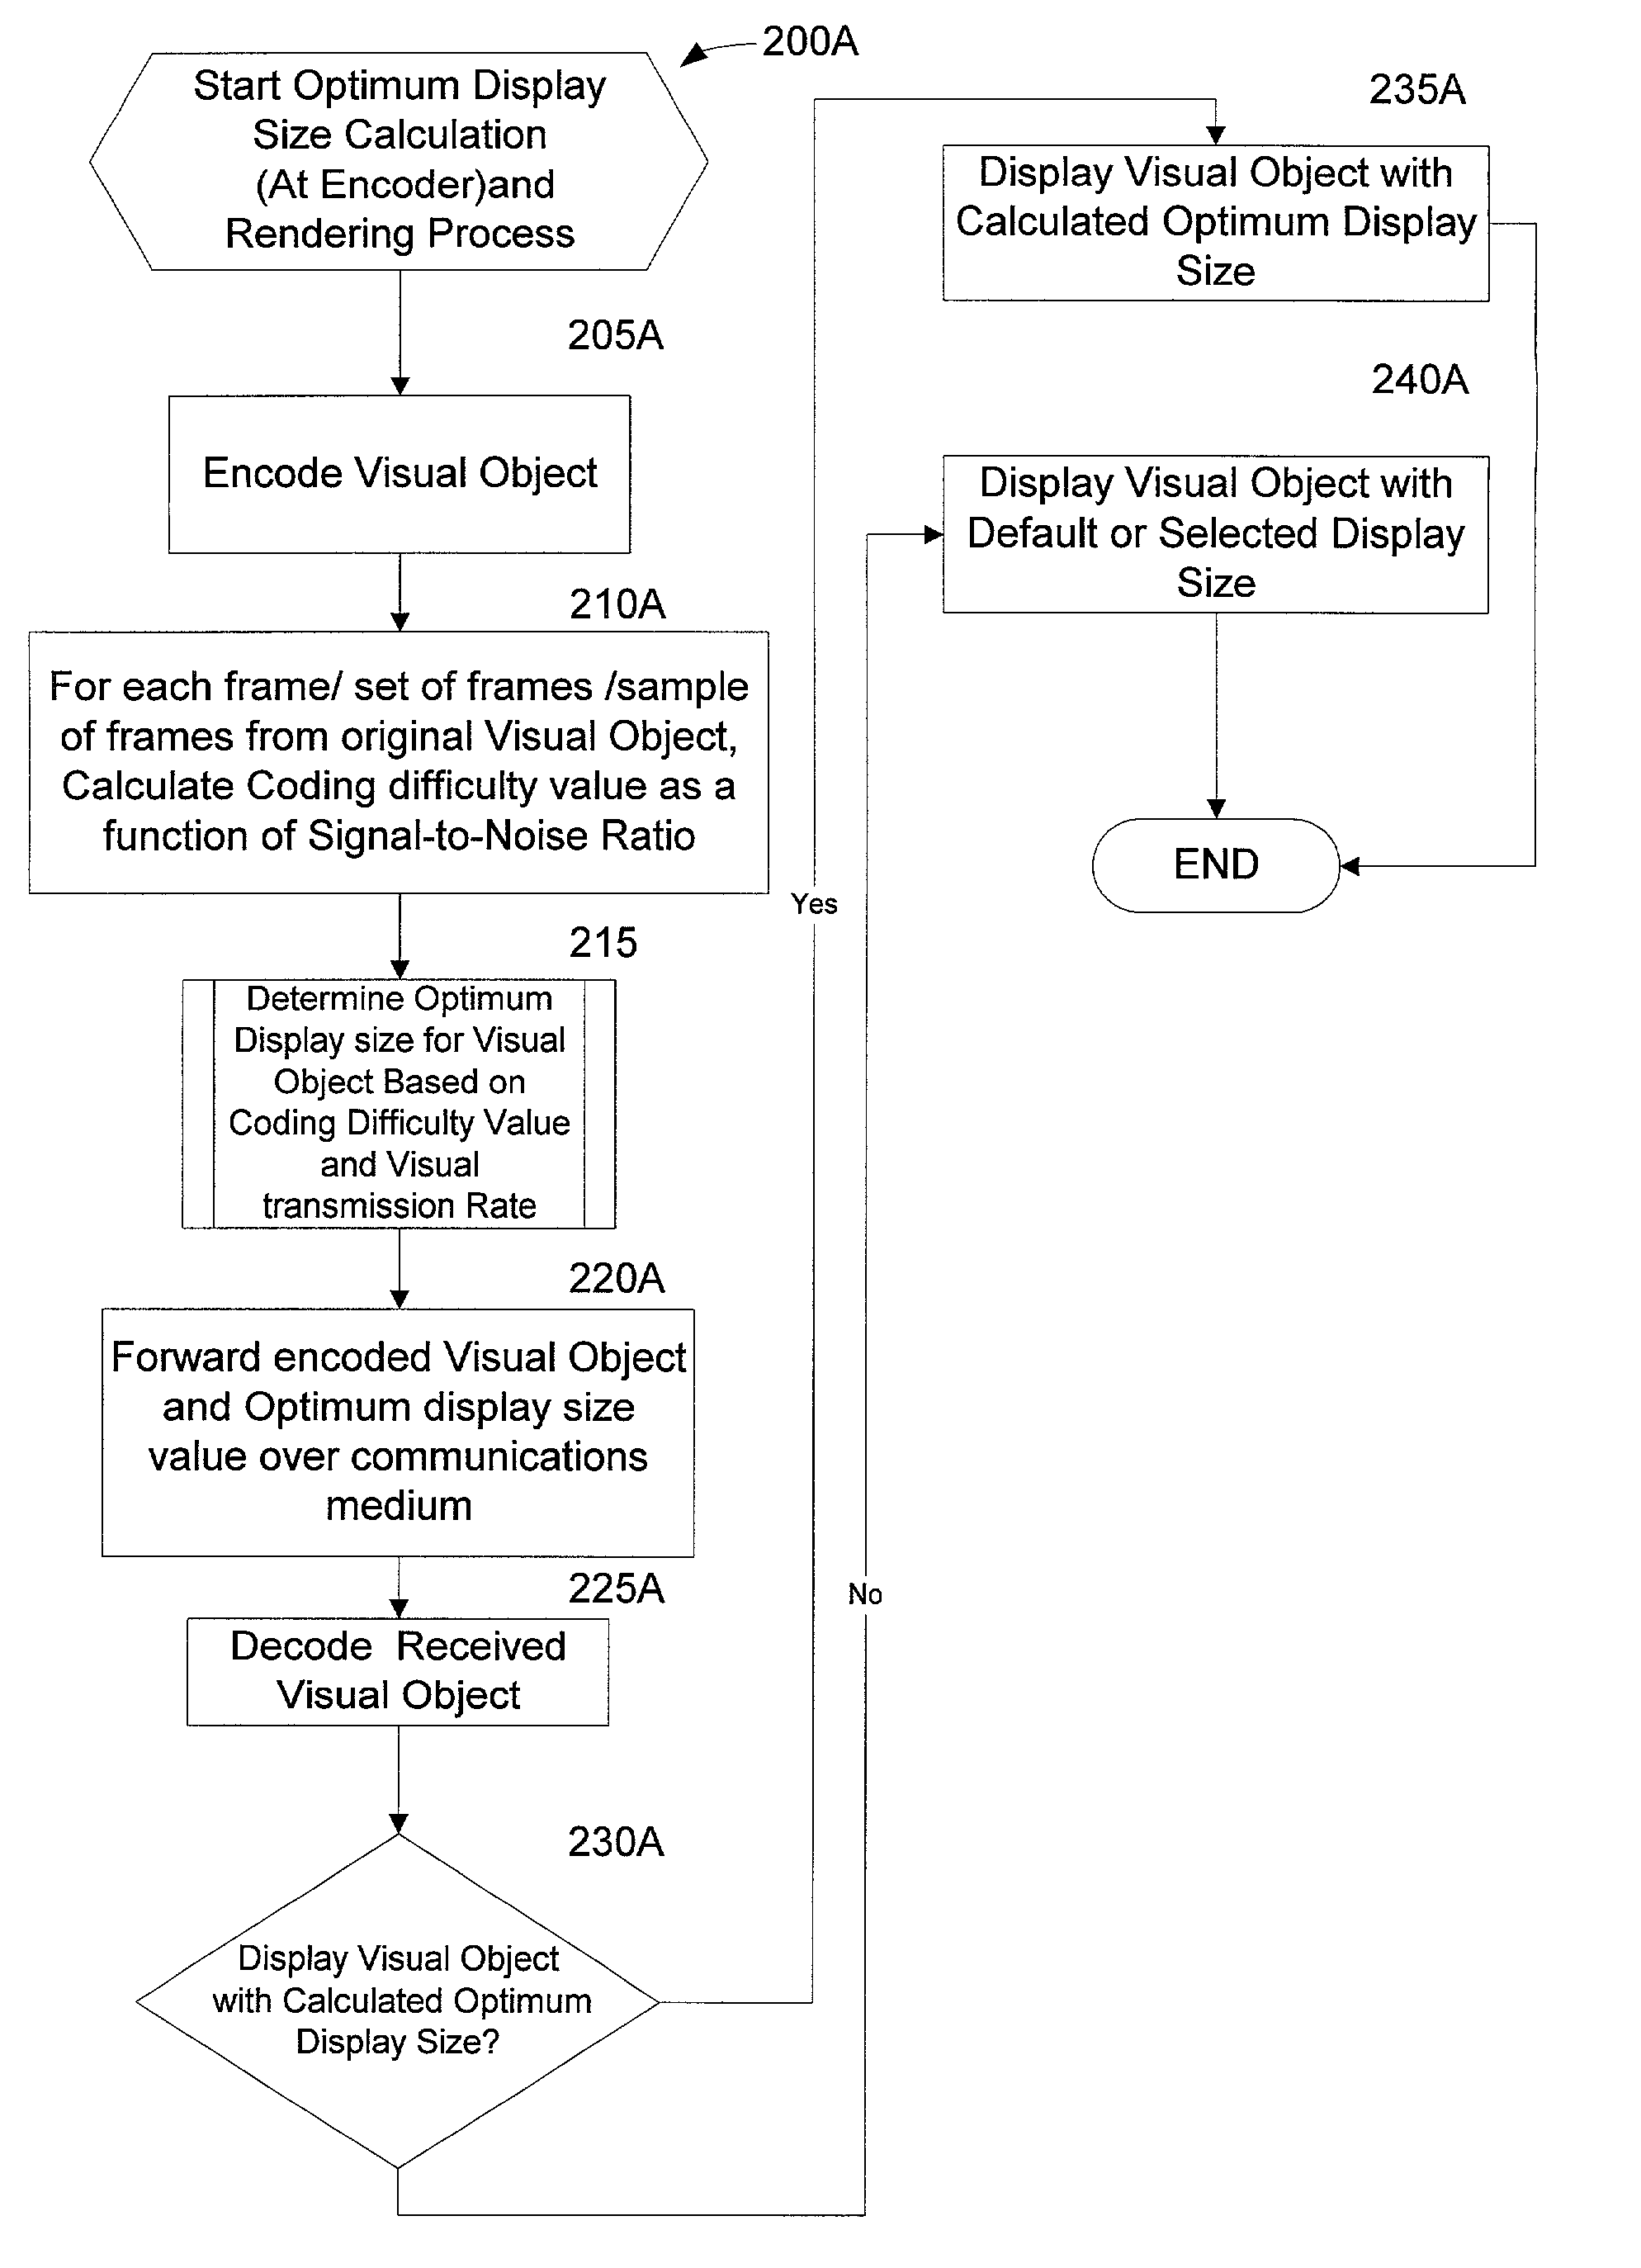 System and method for calculating an optimum display size for a visual object